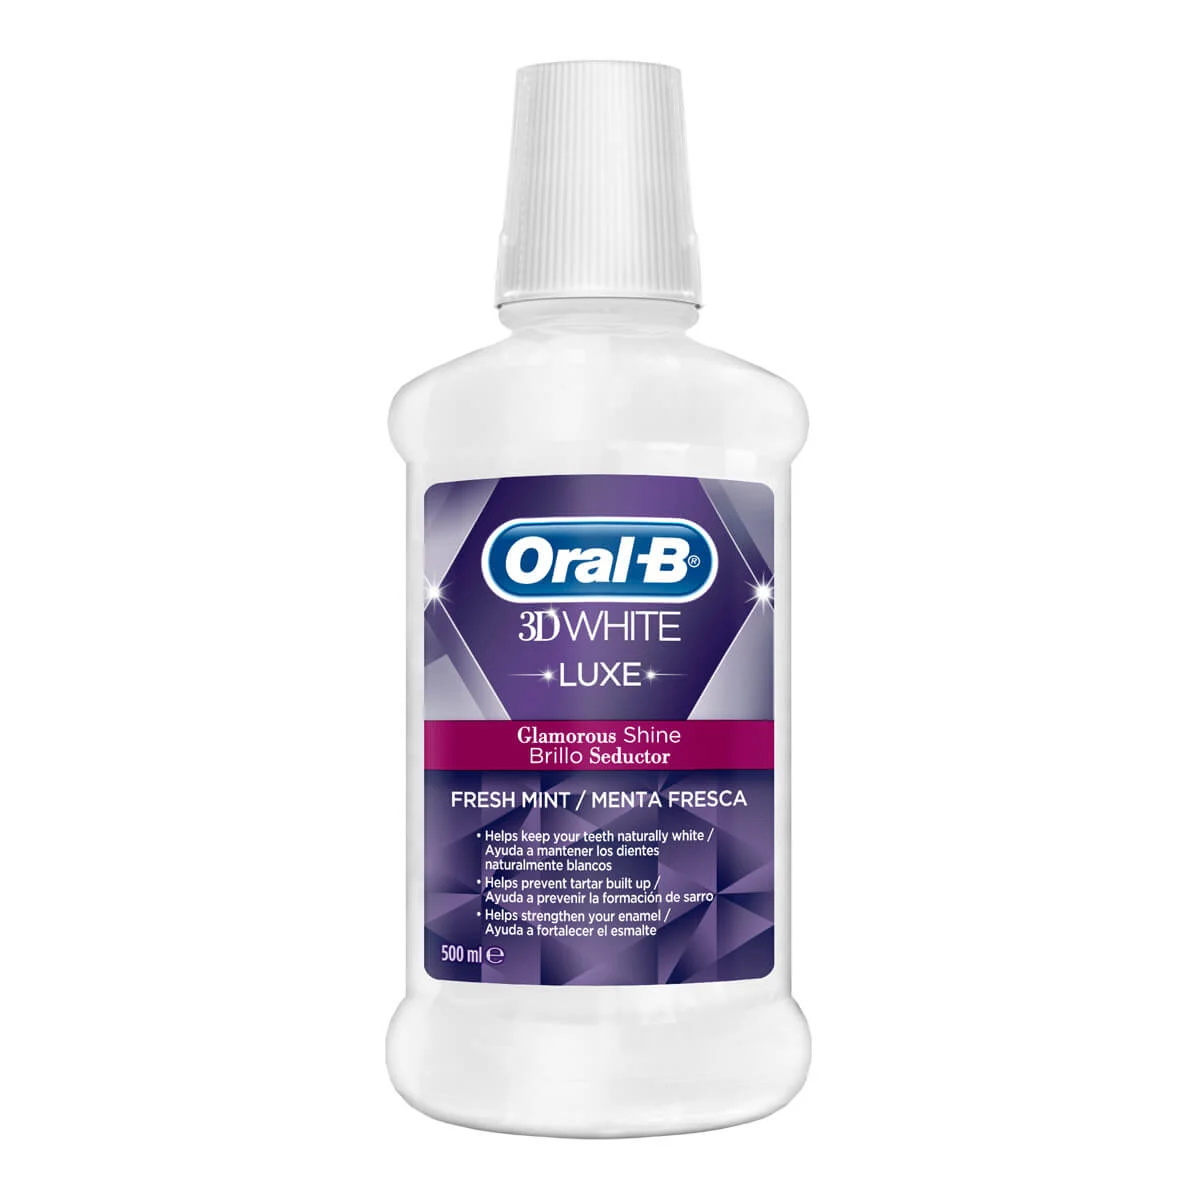 Oral-B Enjuague bucal 3D White Luxe Brillo Seductor undefined